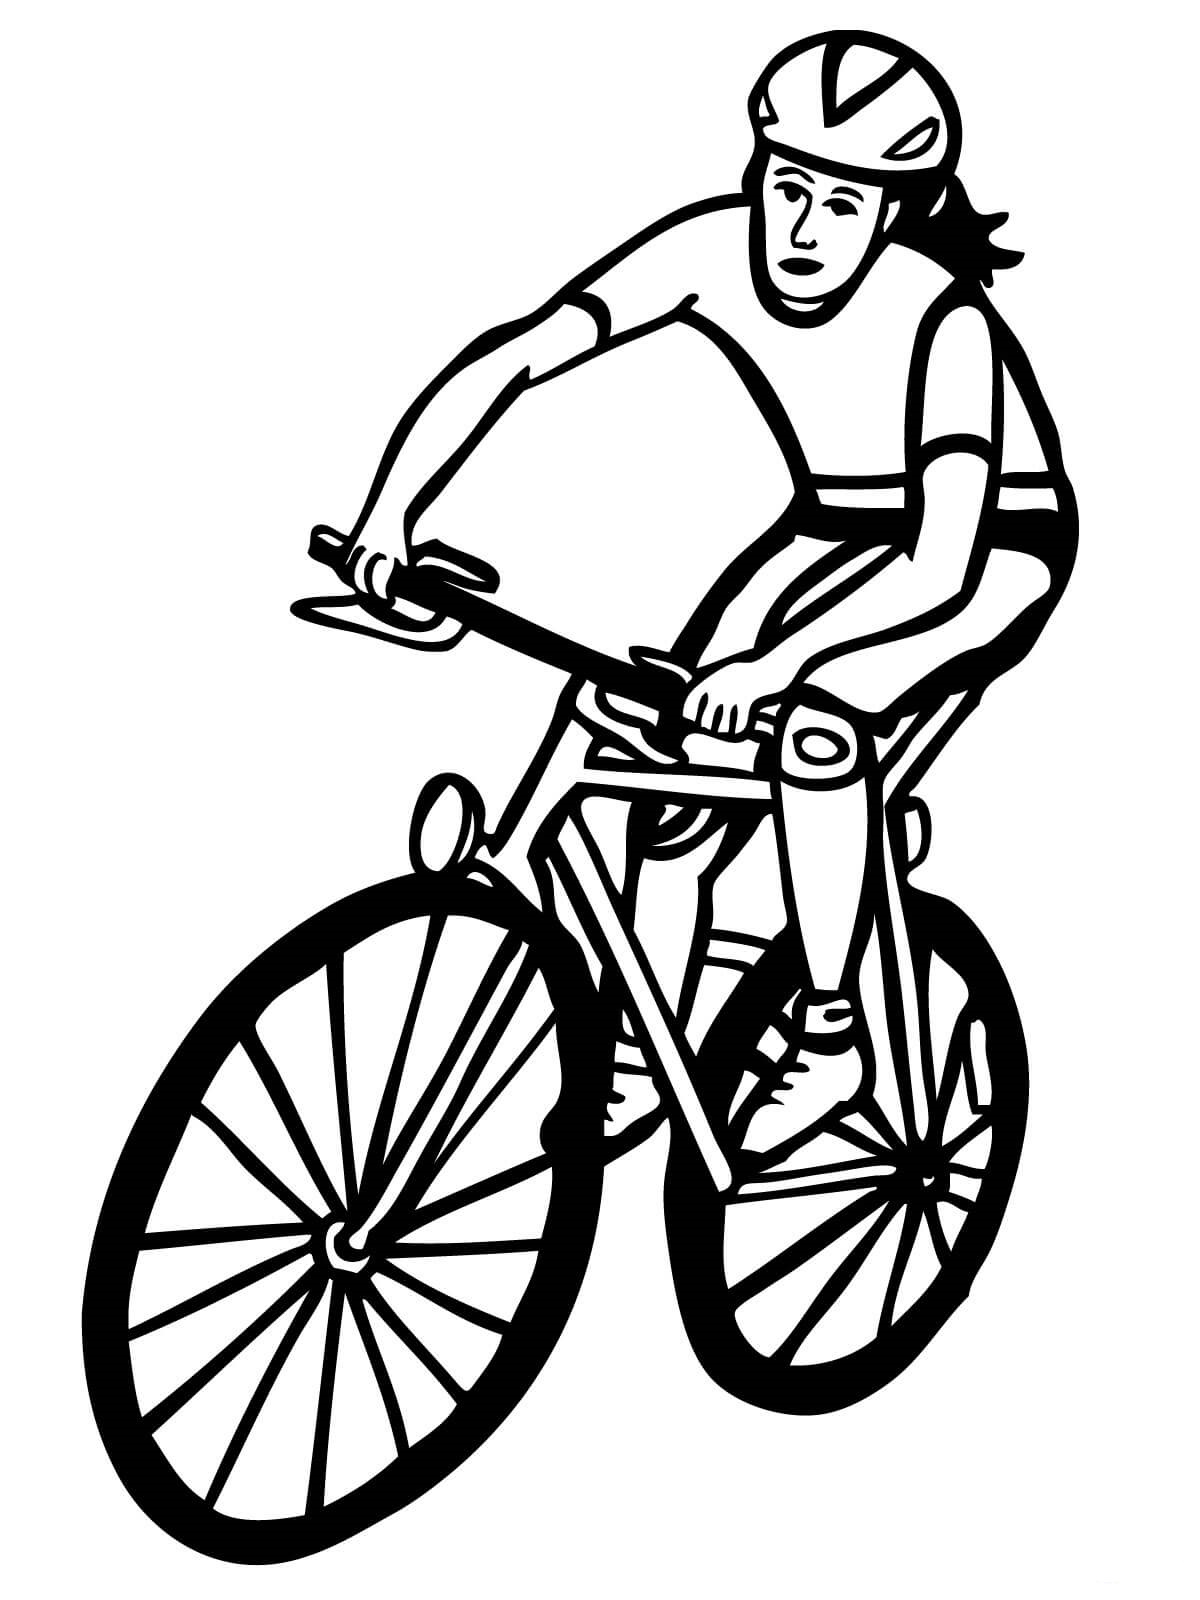 Woman Cyclist Bicycle Coloring Page